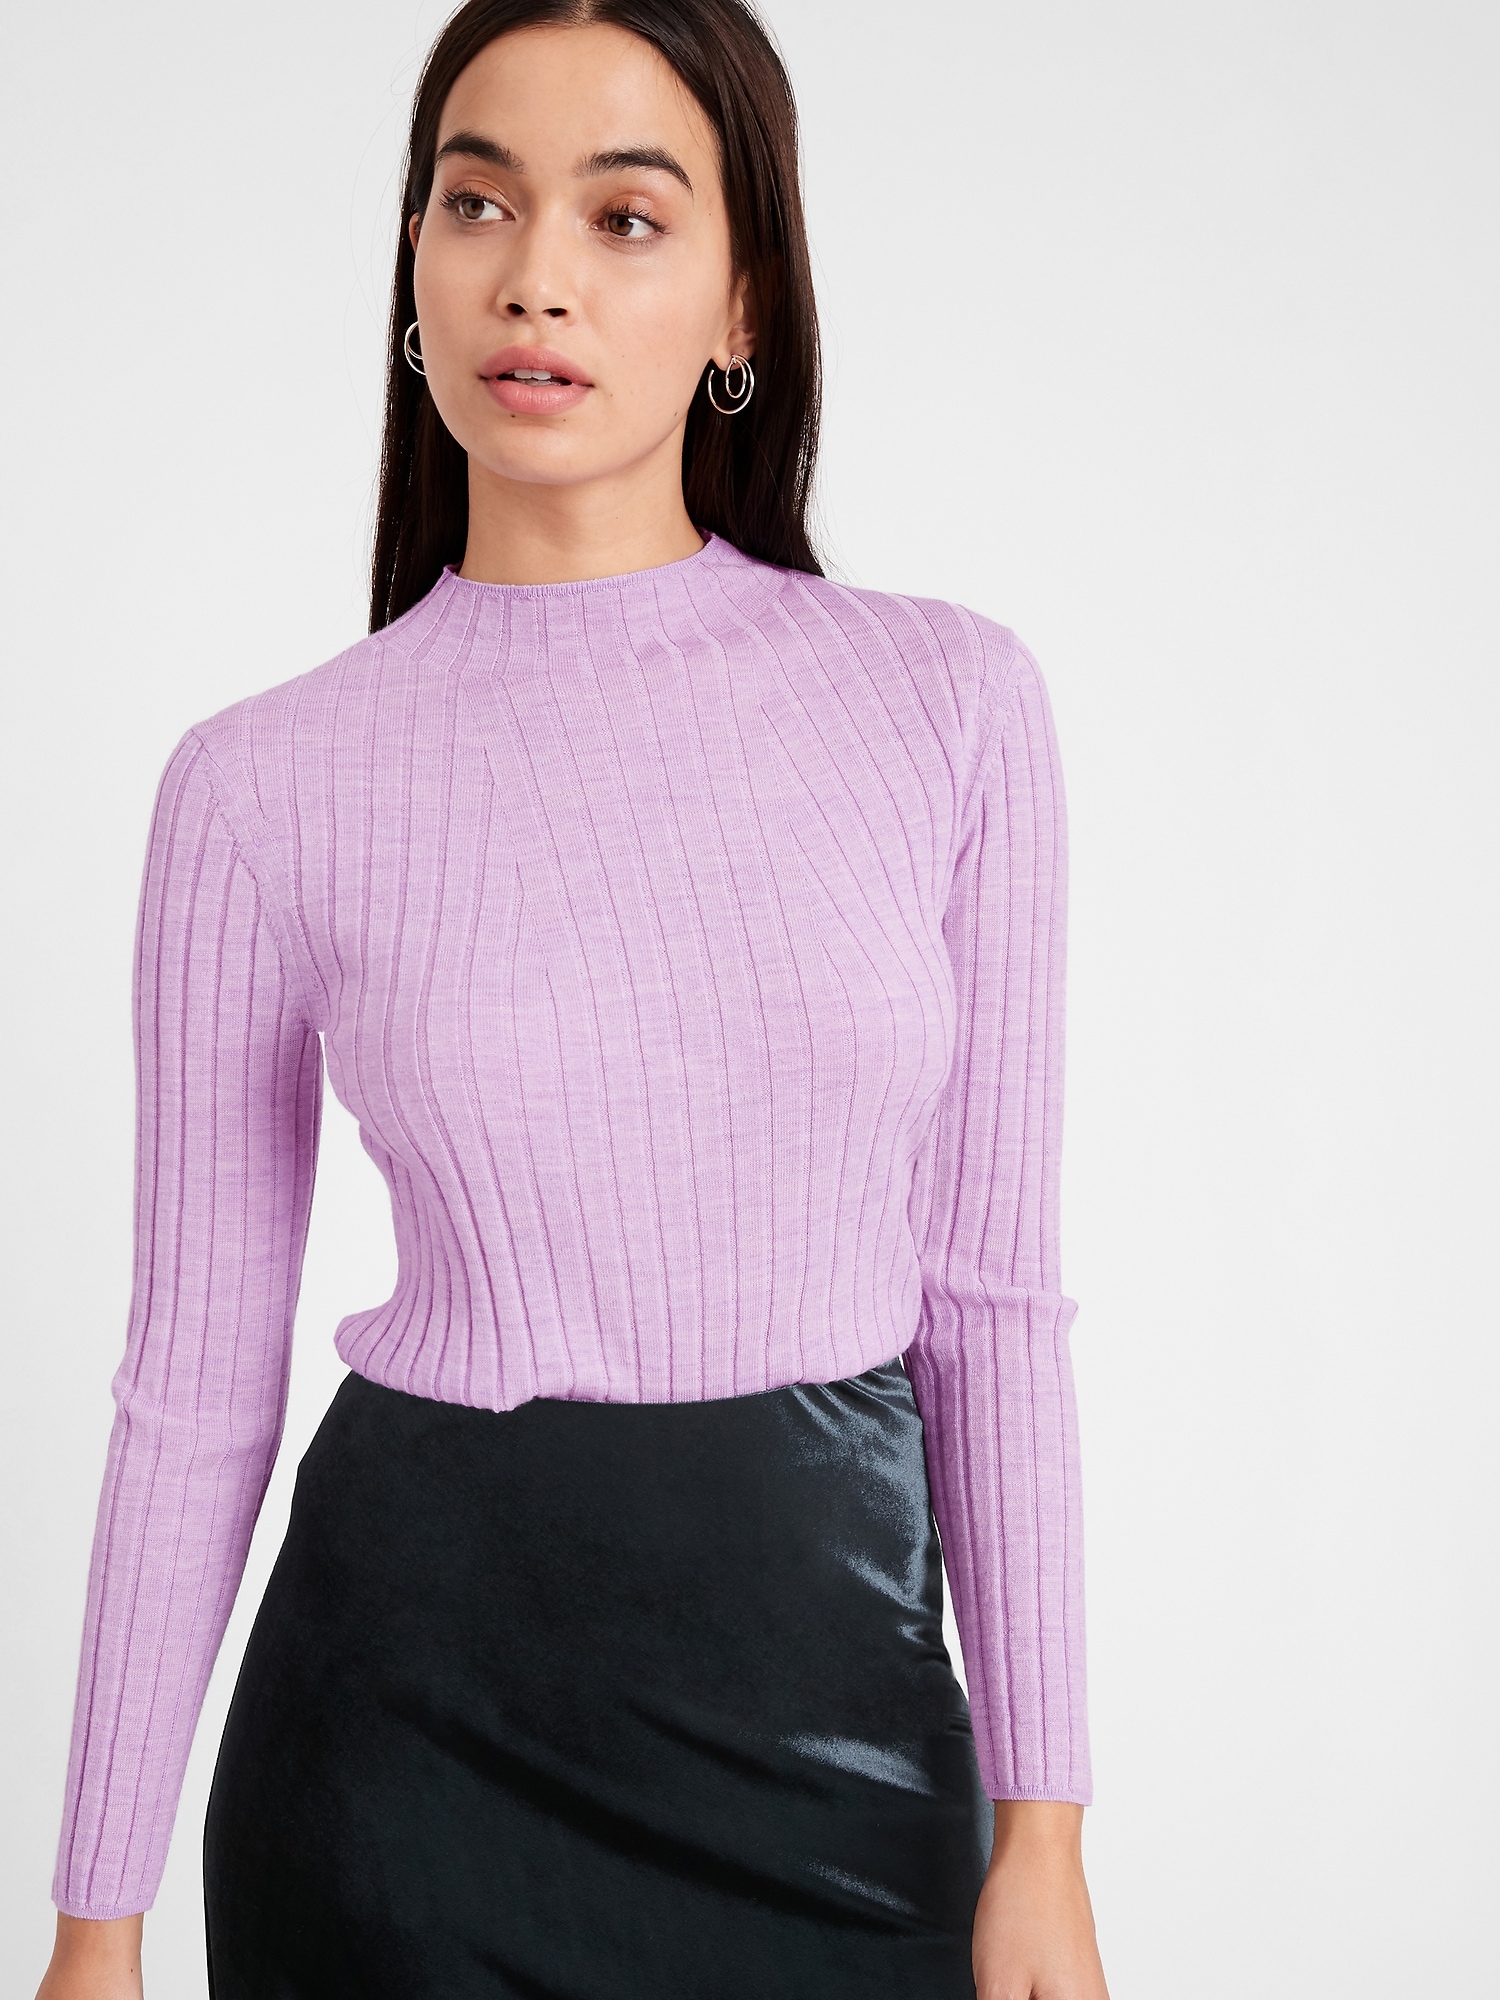 Washable Merino Ribbed Sweater in Responsible Wool